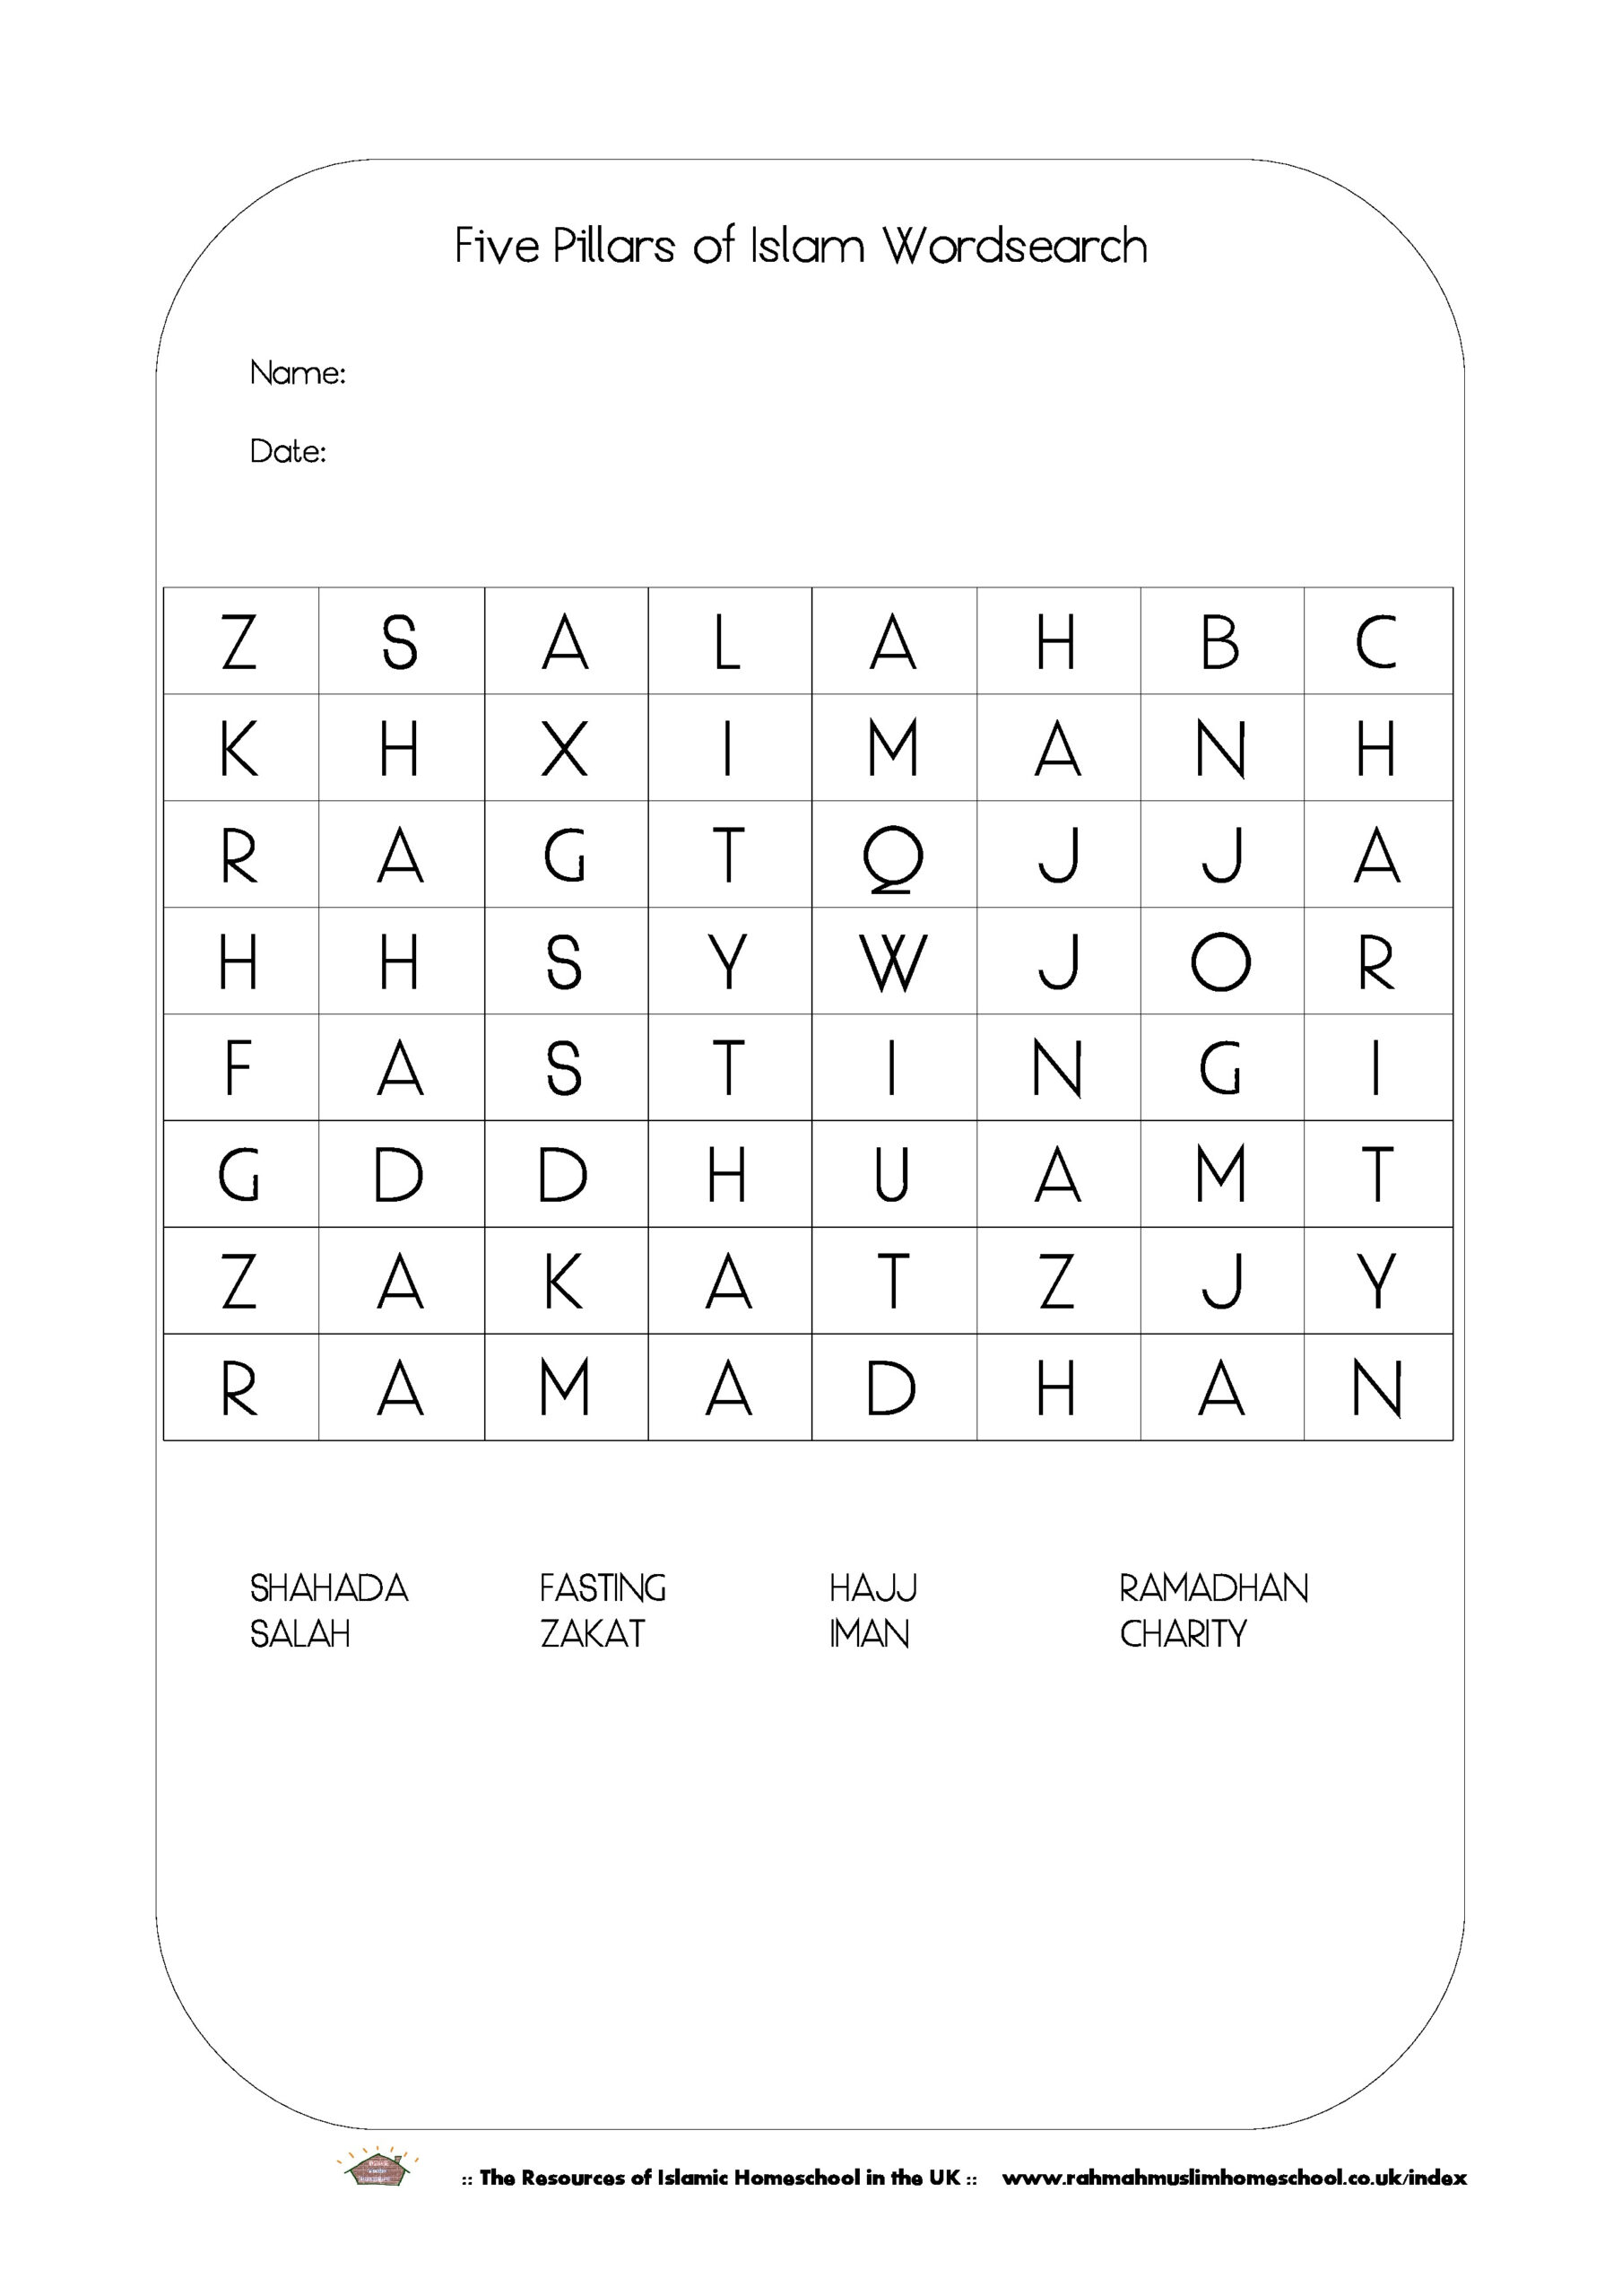 Islamic Wordsearch The Resources Of Islamic Homeschool In The UK